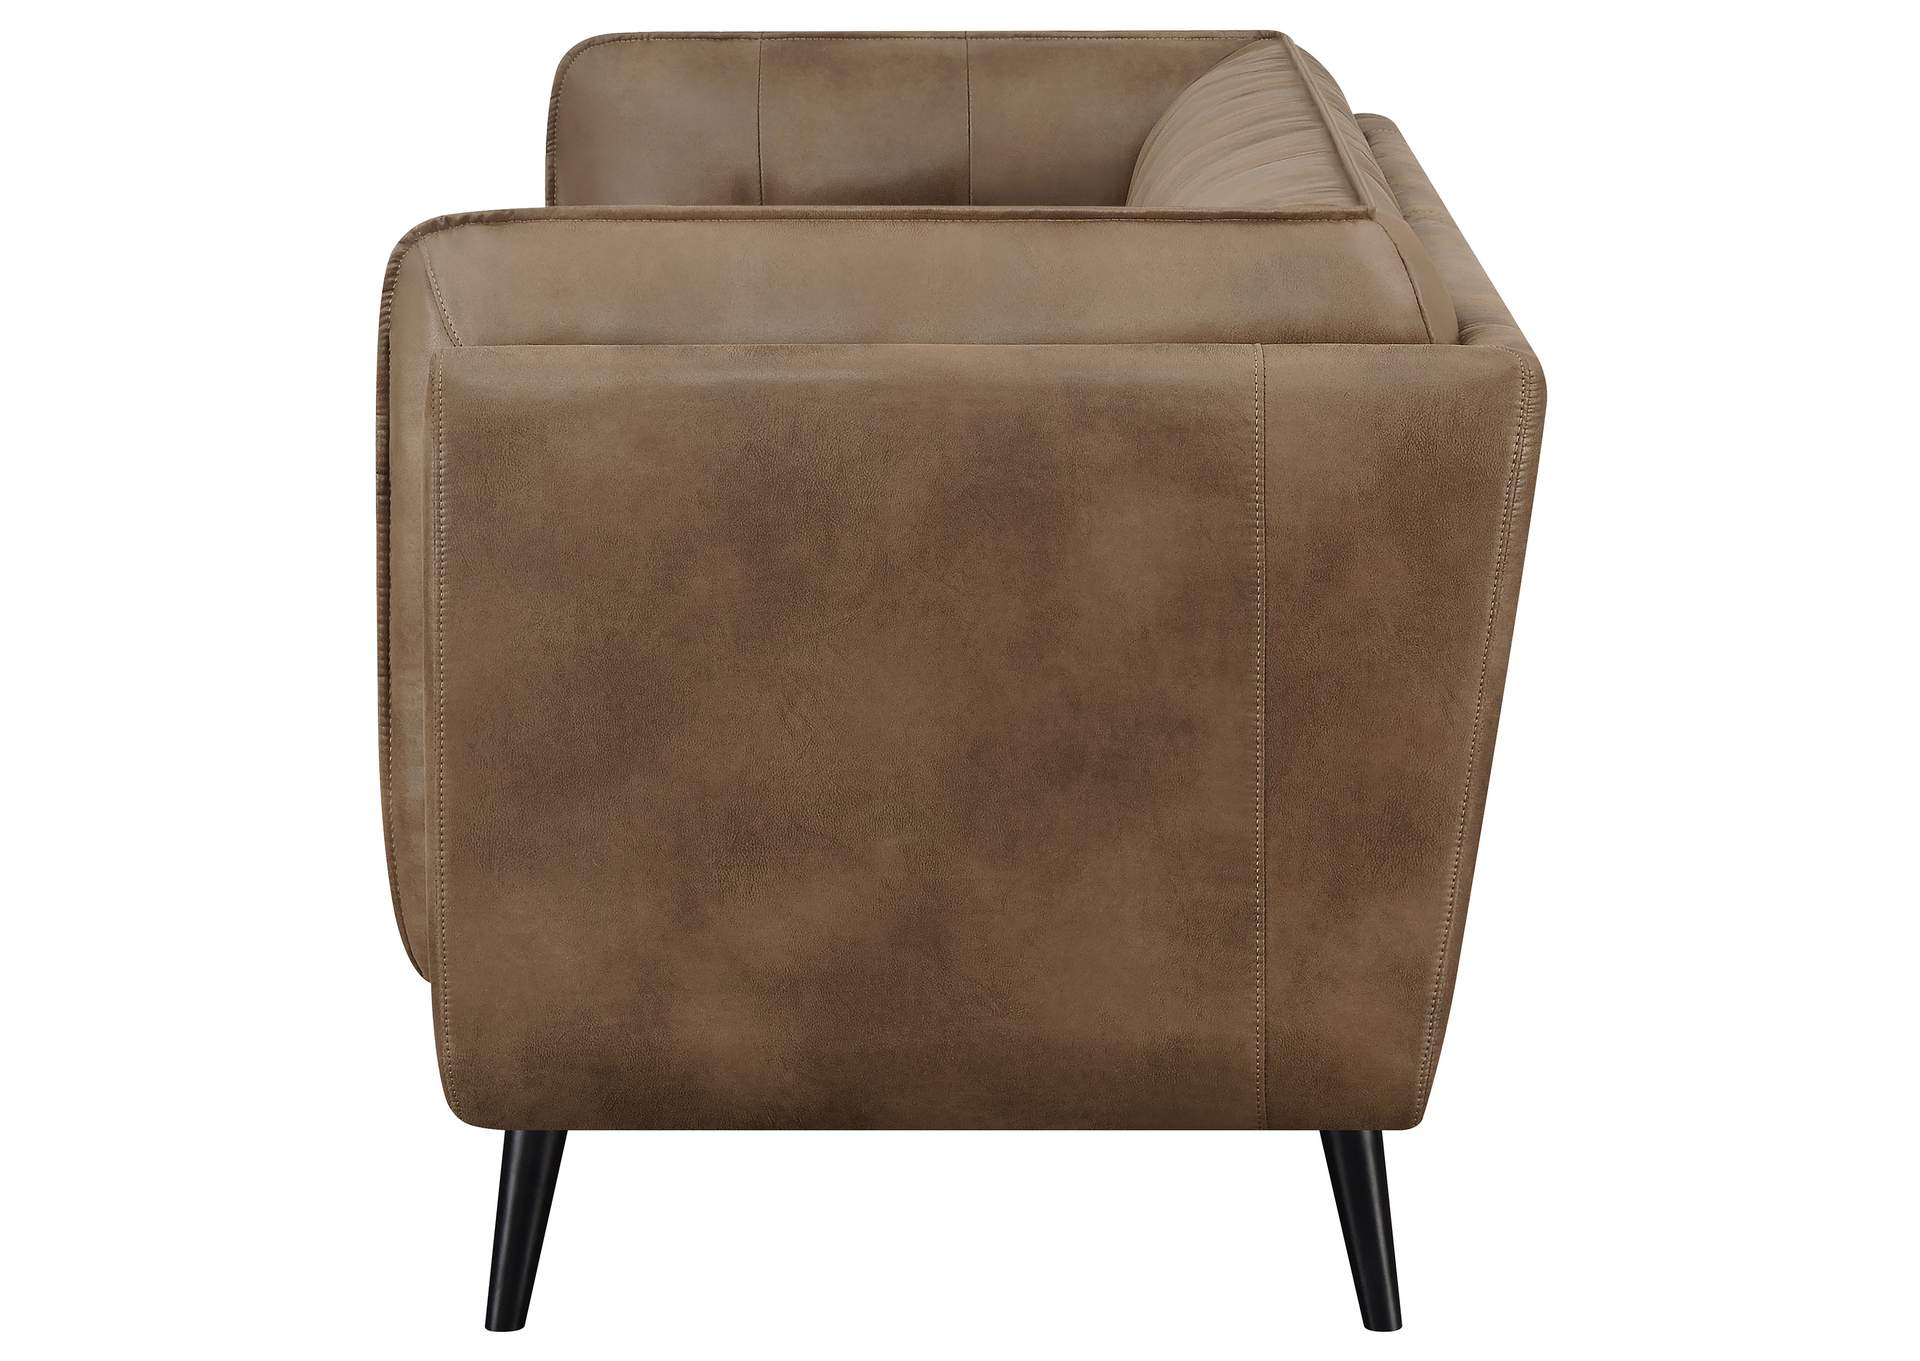 Thatcher Upholstered Button Tufted Sofa Brown,Coaster Furniture